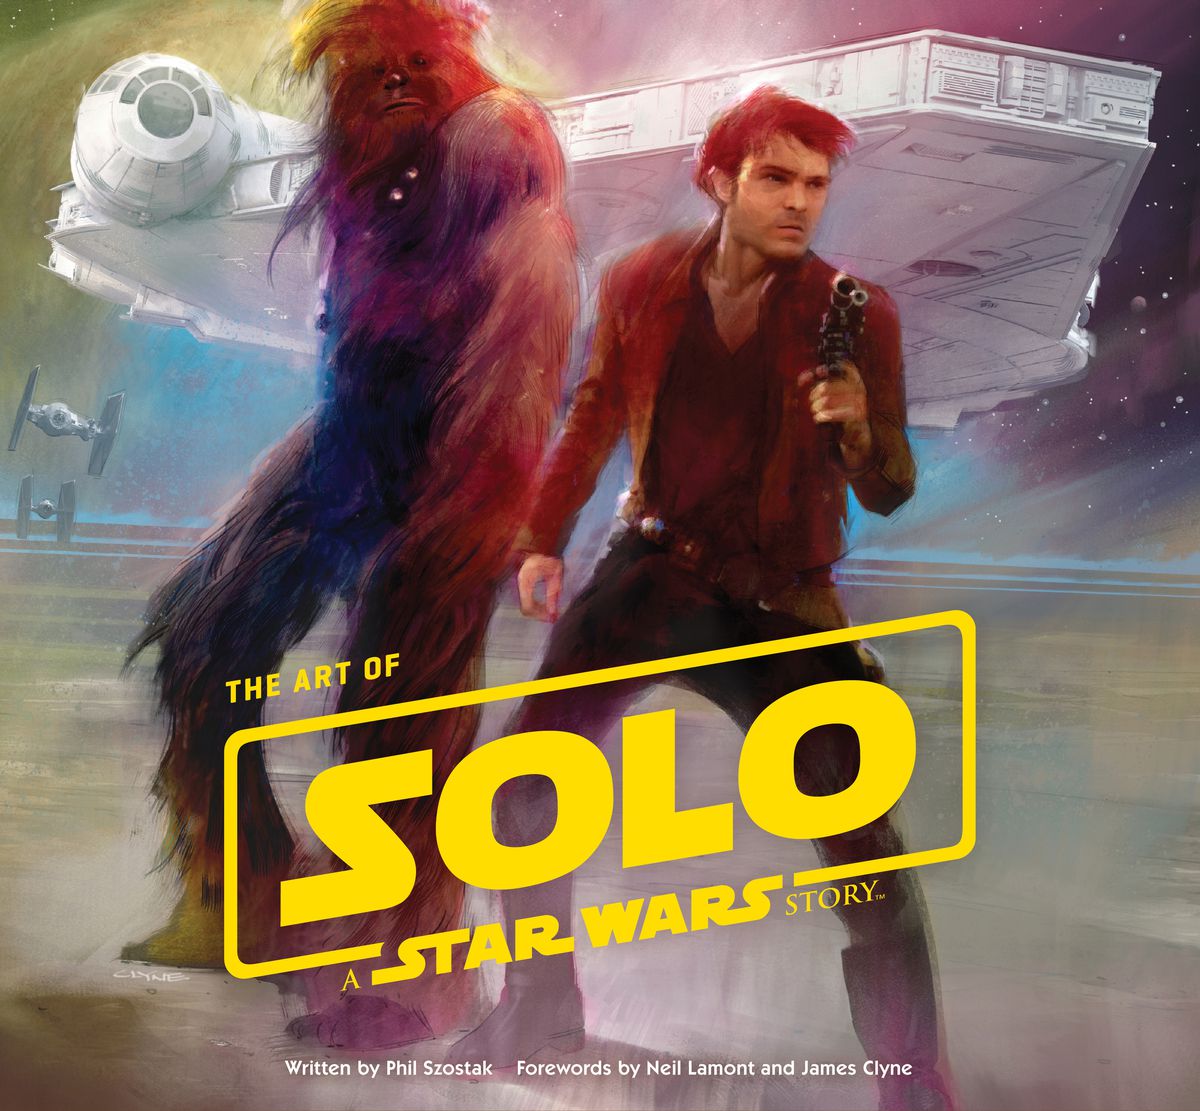 The cover of The Art of Solo: A Star Wars Story includes a portrait study of Han and Chewbacca.